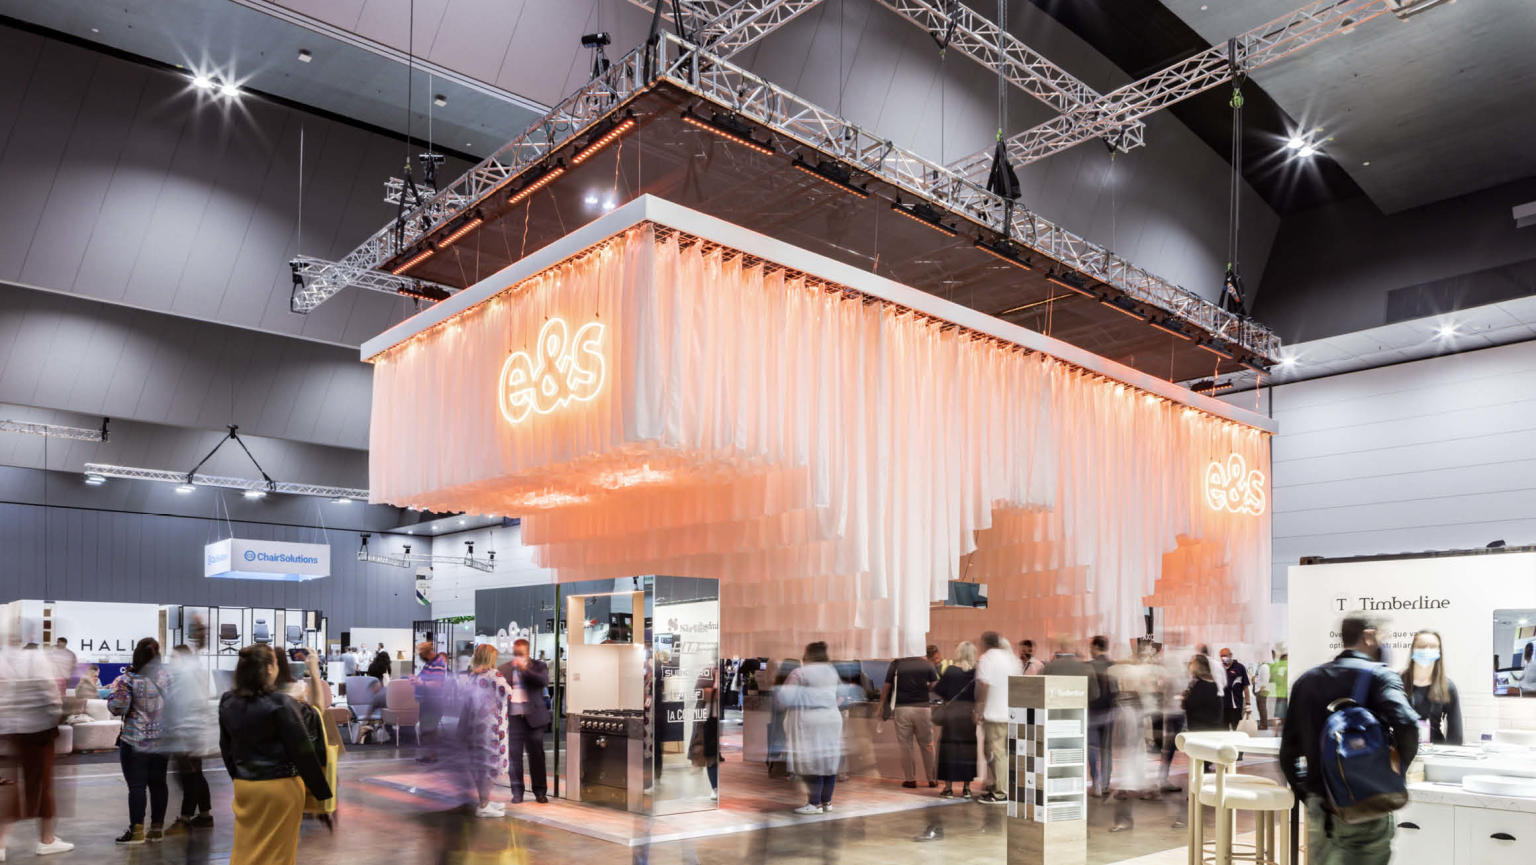 A visually stunning exhibition bay featuring a grand tiered fringe chandelier with lights and a neon logo, as people leisurely walk and explore the space.